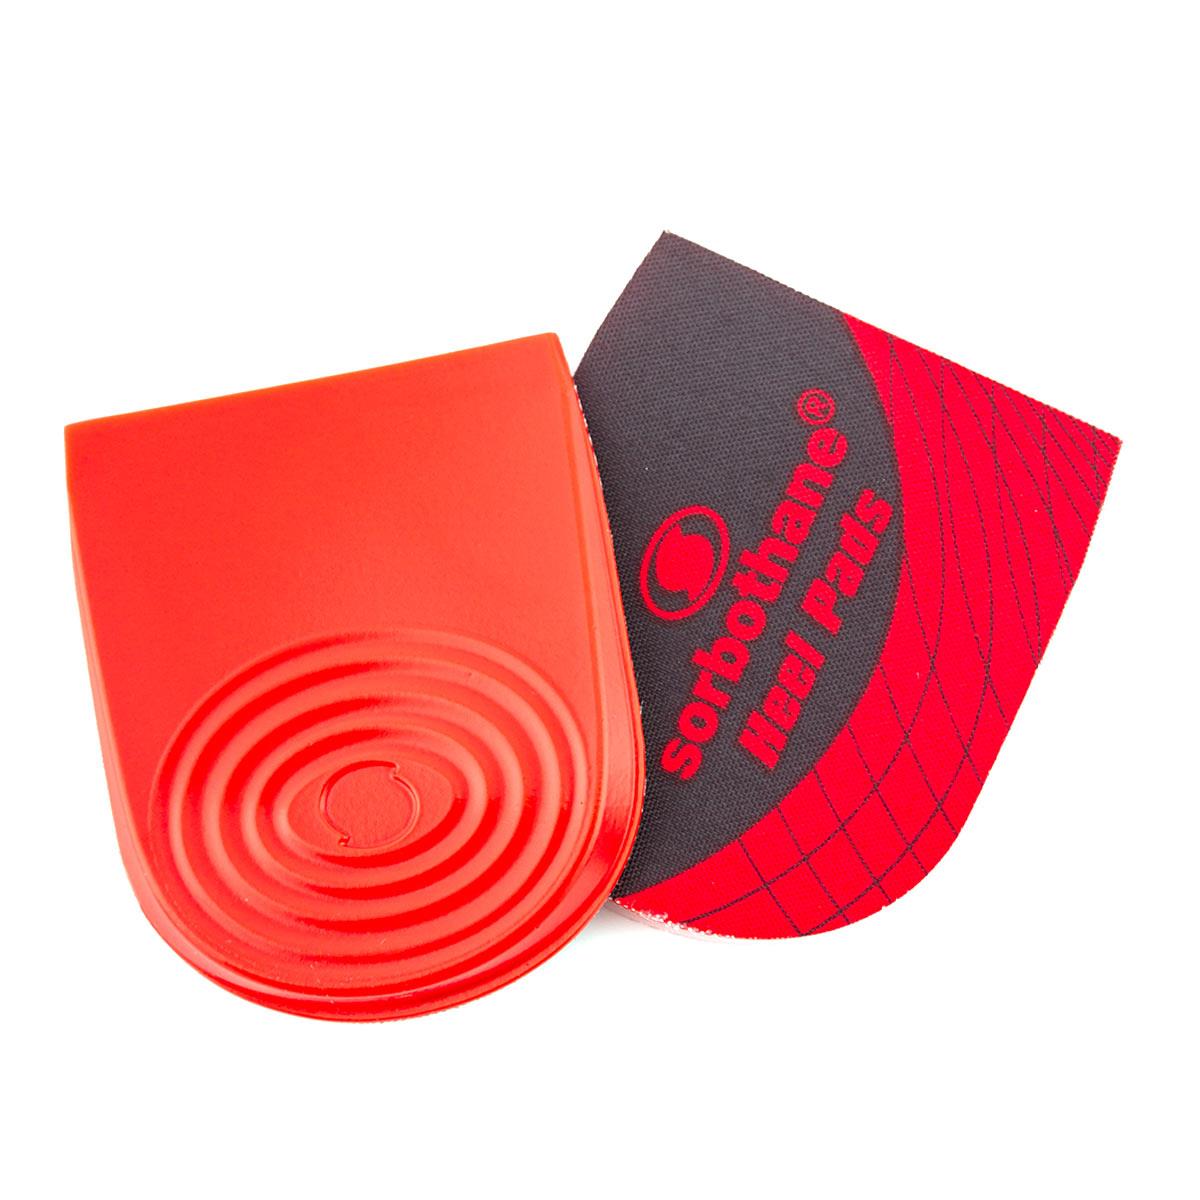 Sorbothane Shock Stopper Heel Pads rugbystore